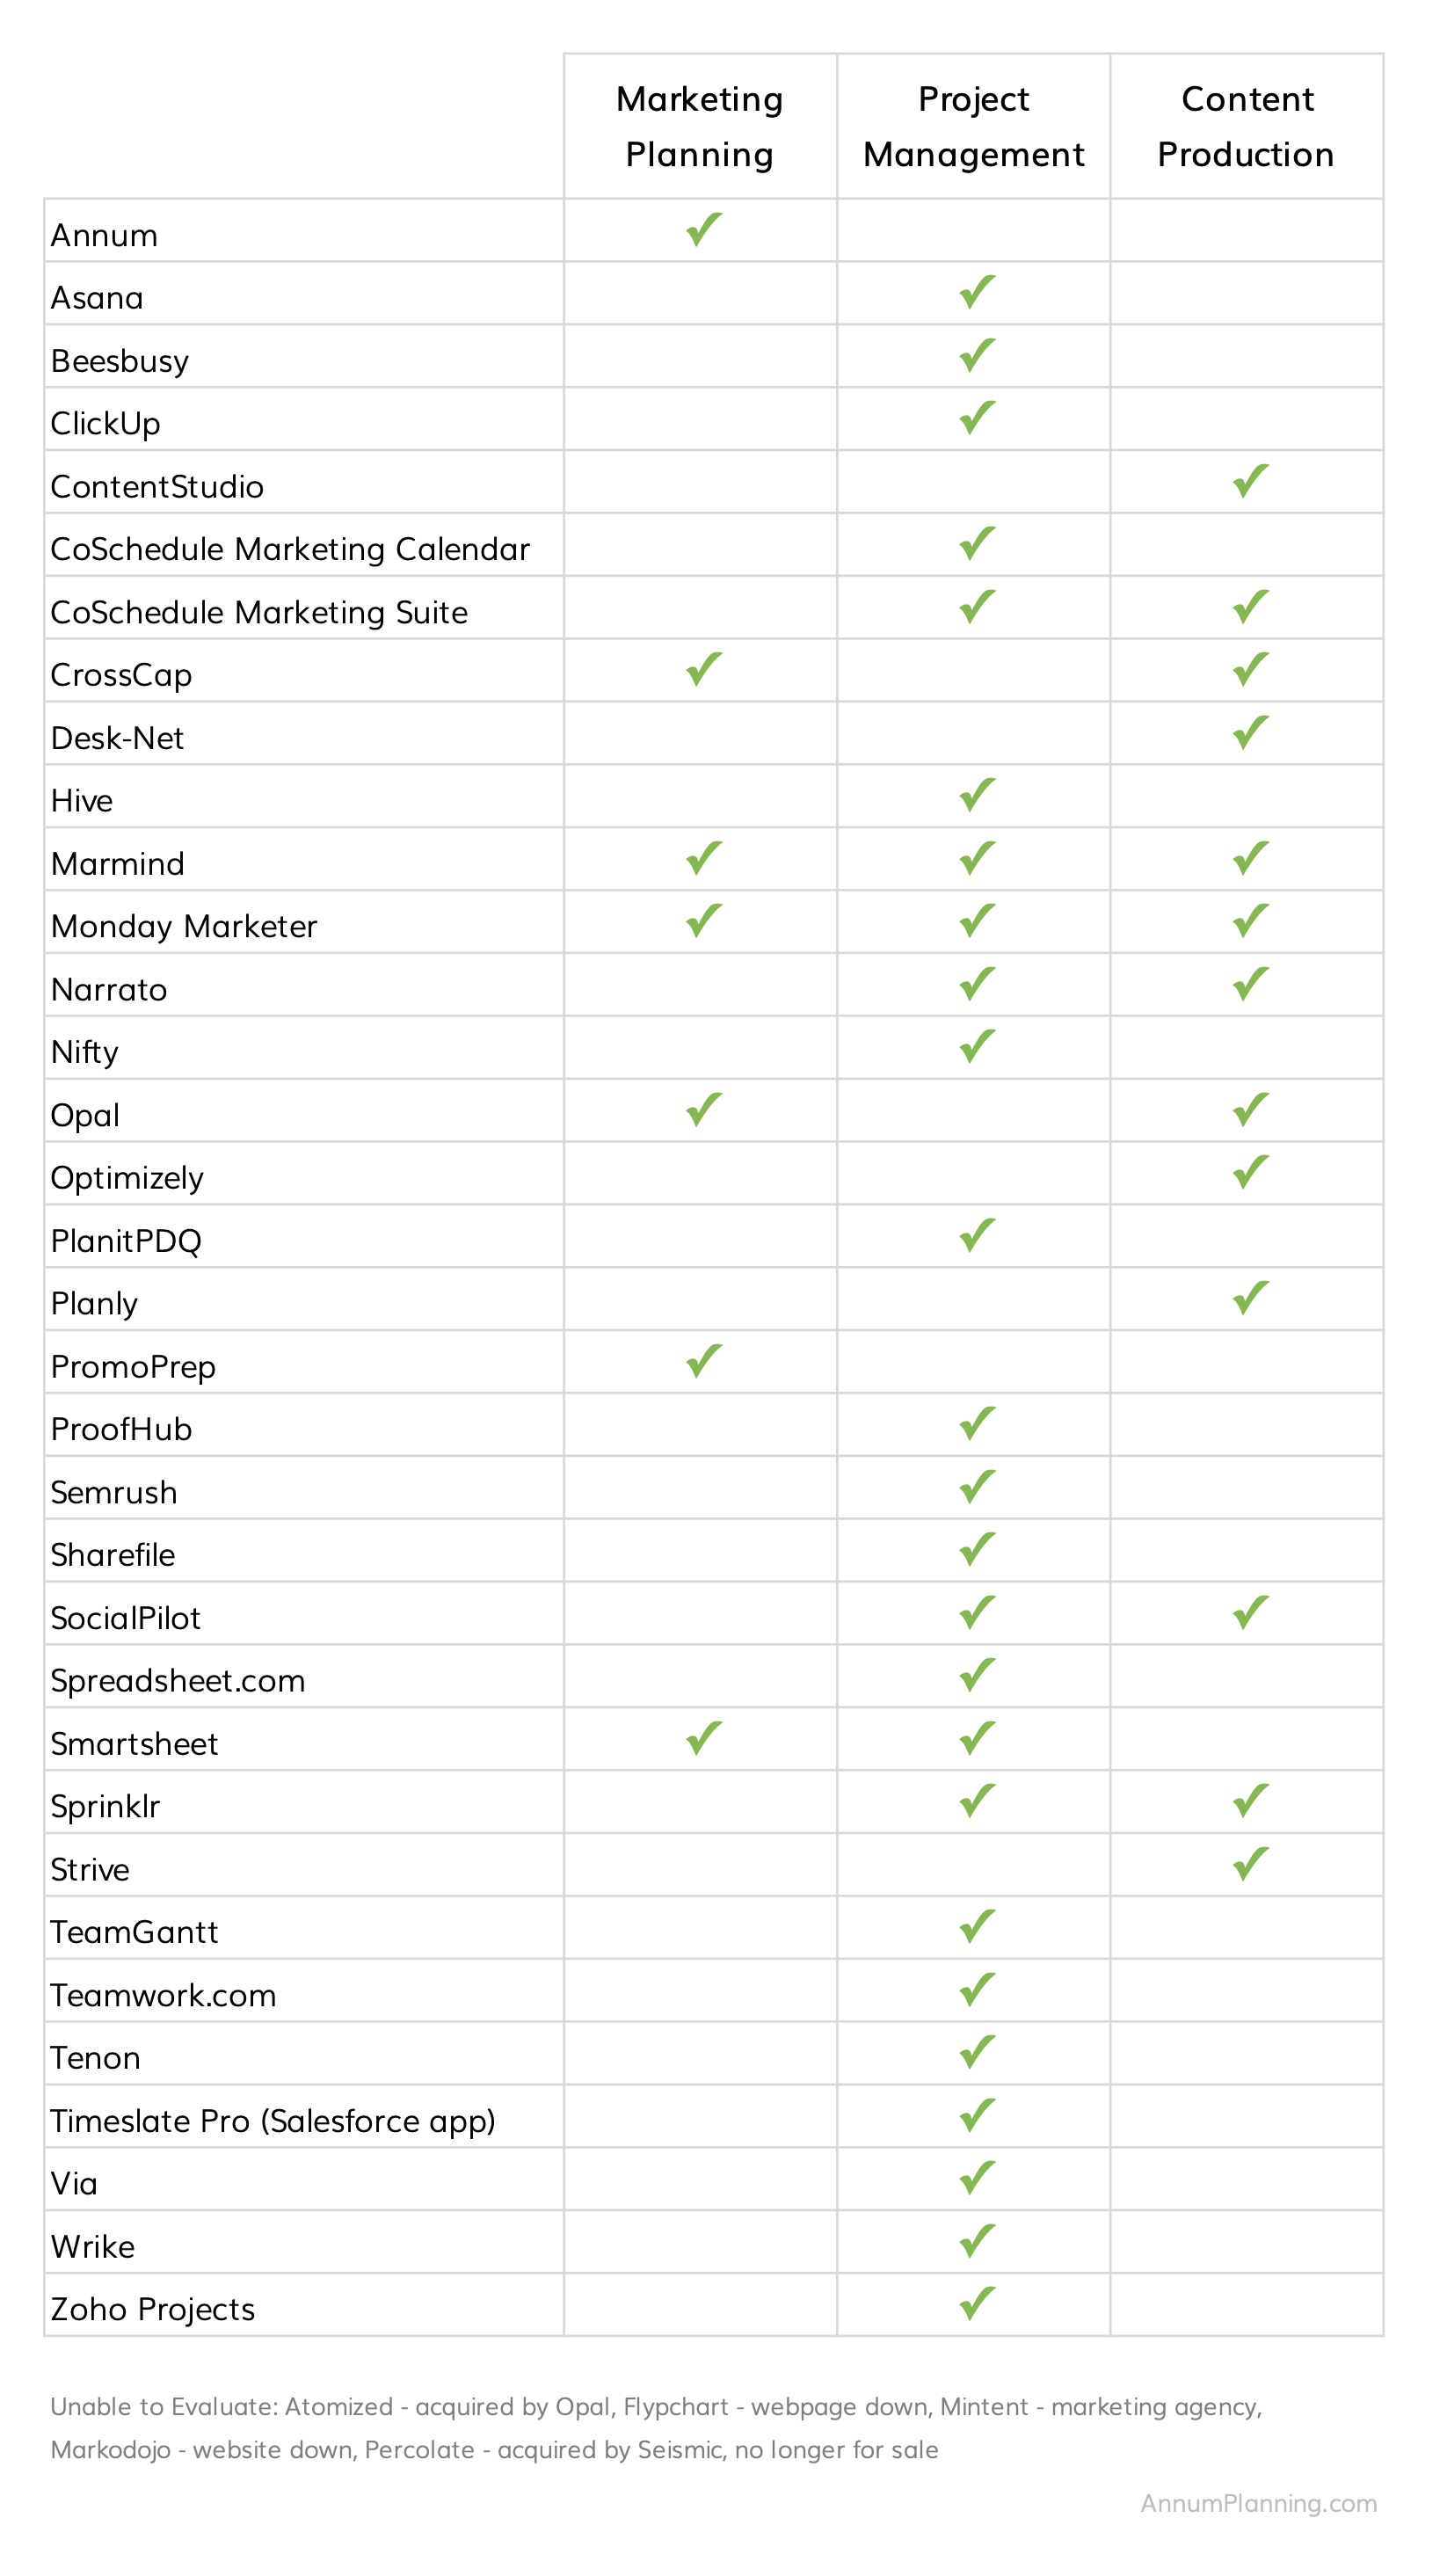 Comparison of Best Marketing Planning and Calendar Tools